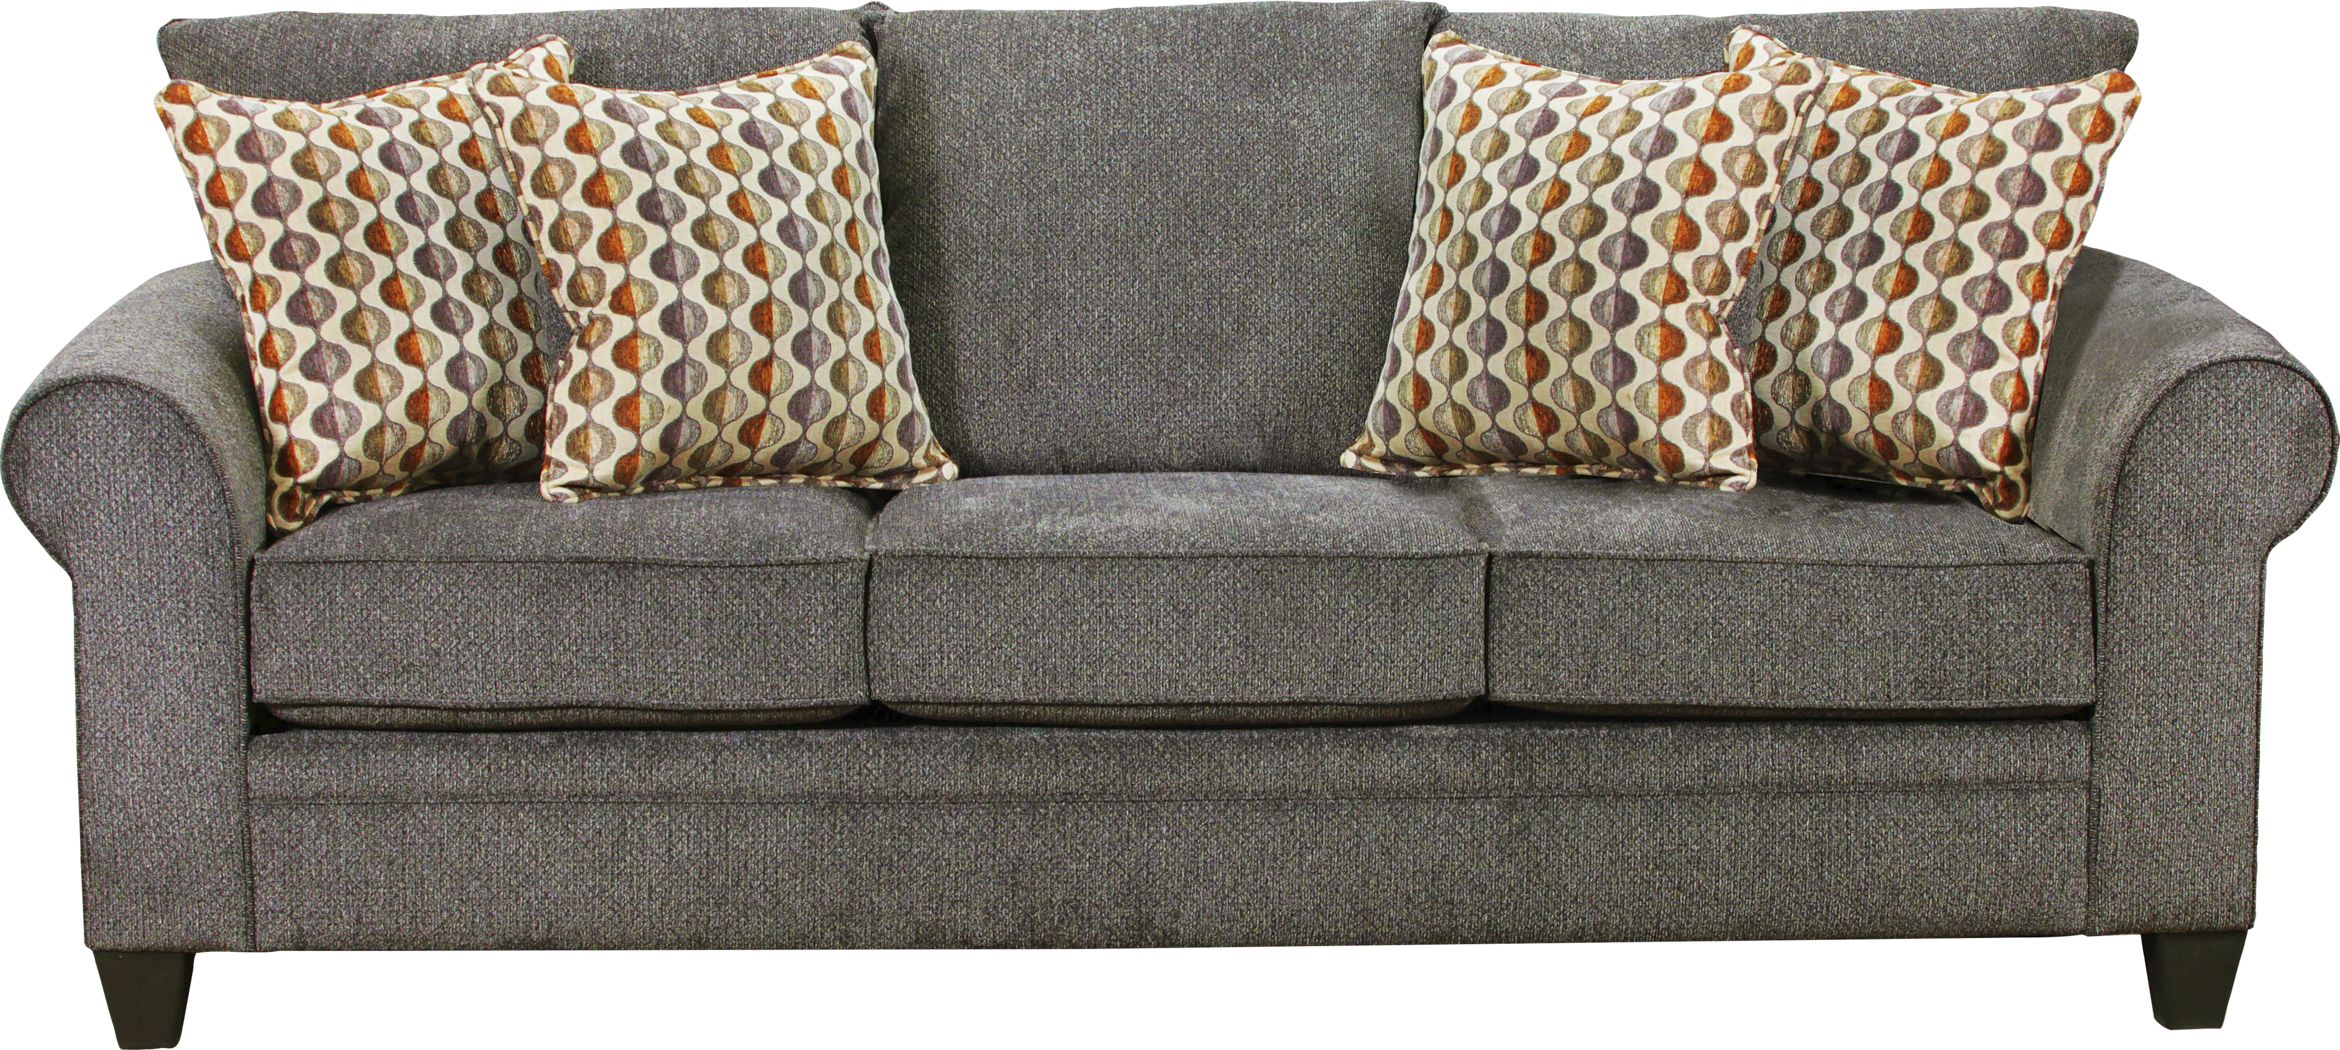 Layna Pewter Sofa Rooms To Go